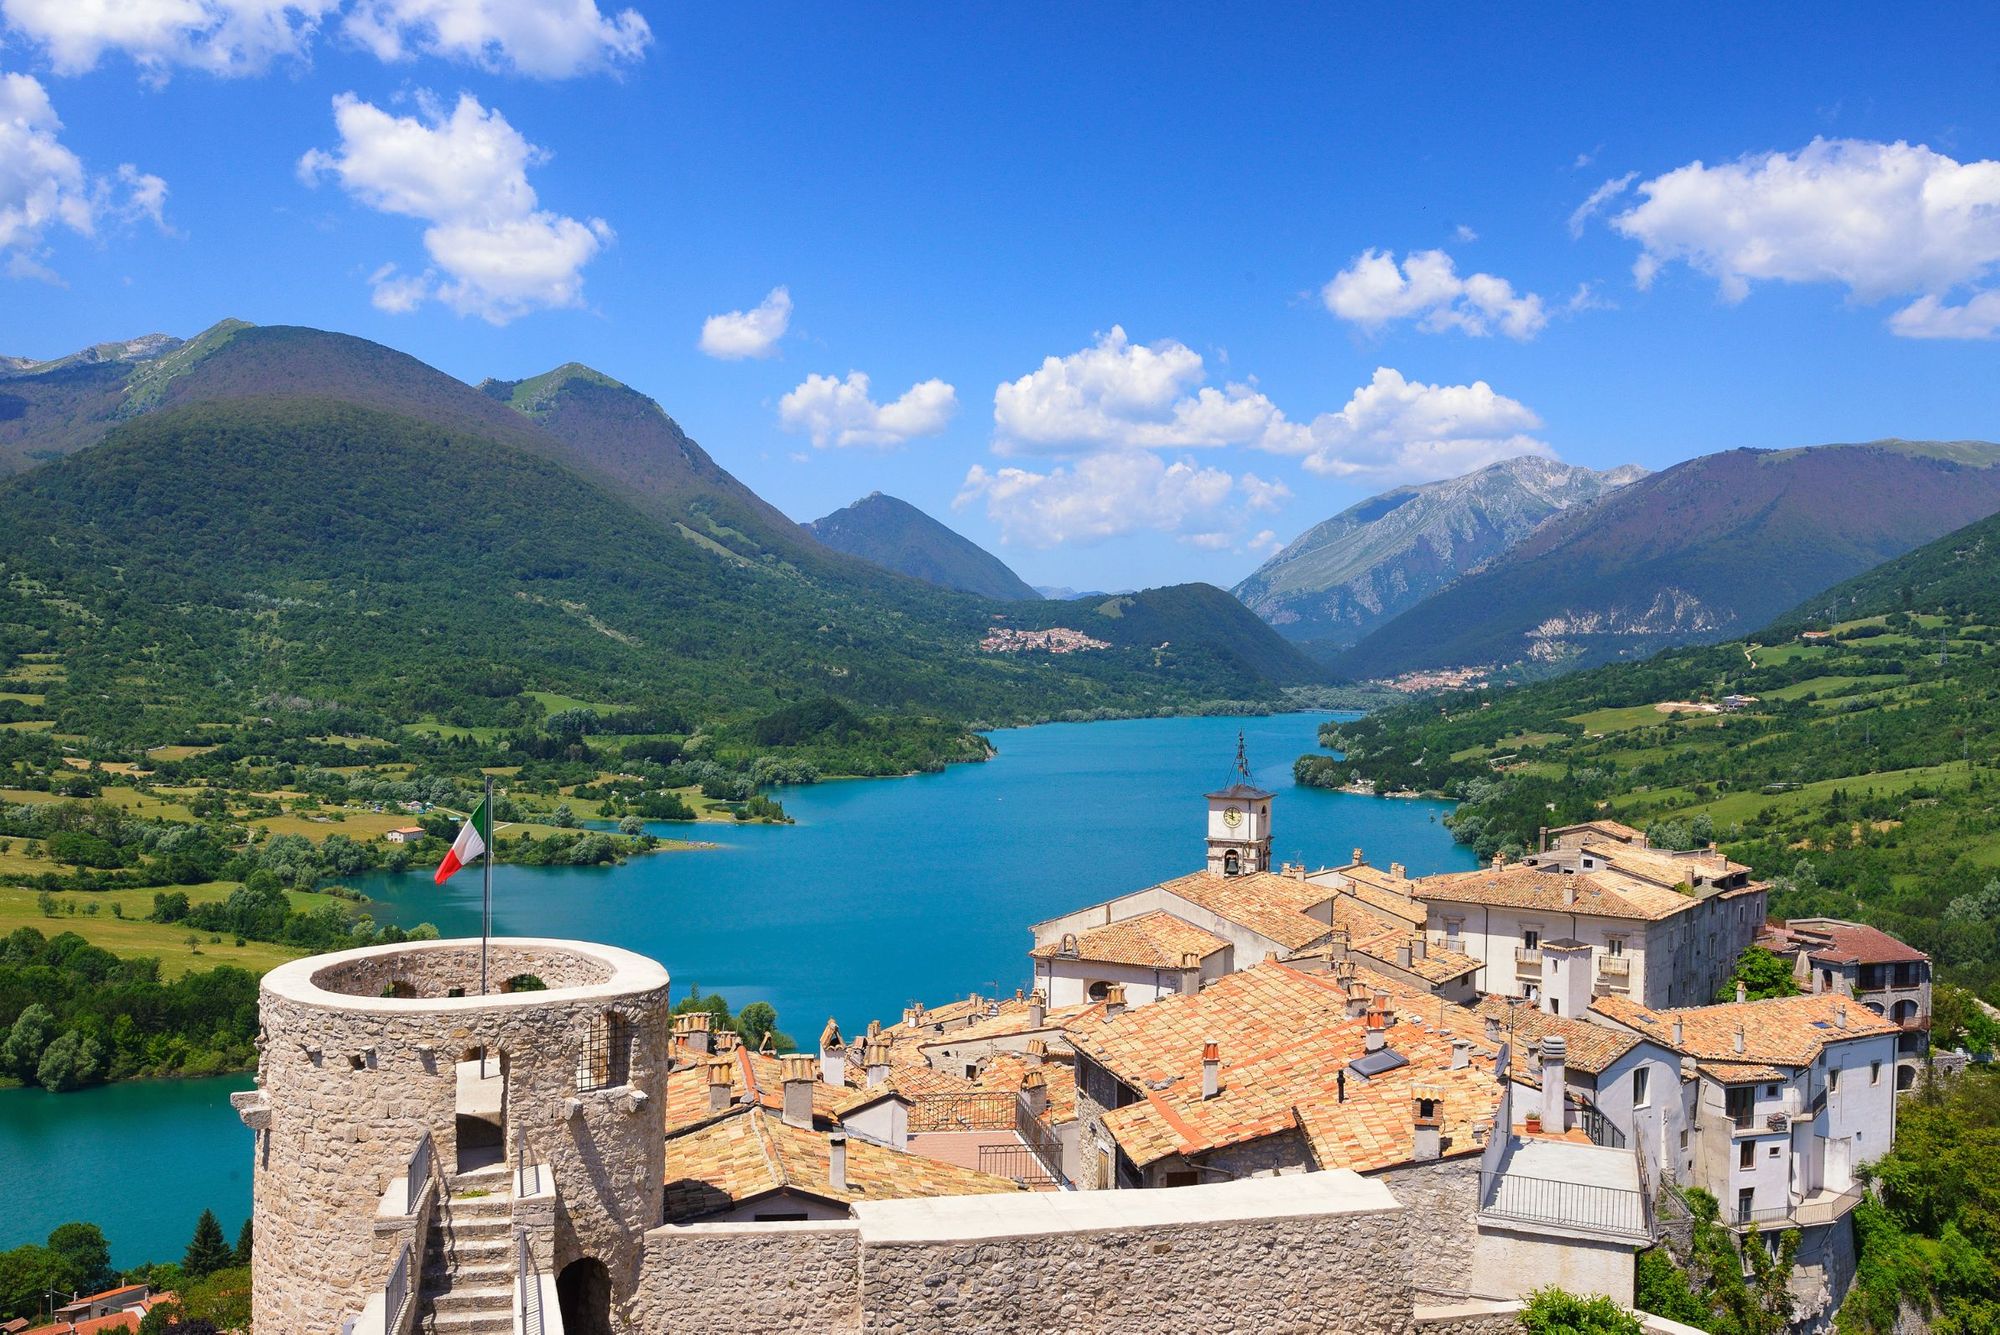 Abruzzo National Park, founded in 1922, with the medieval town of Barrea and the Barrea Lake. Photo: Getty